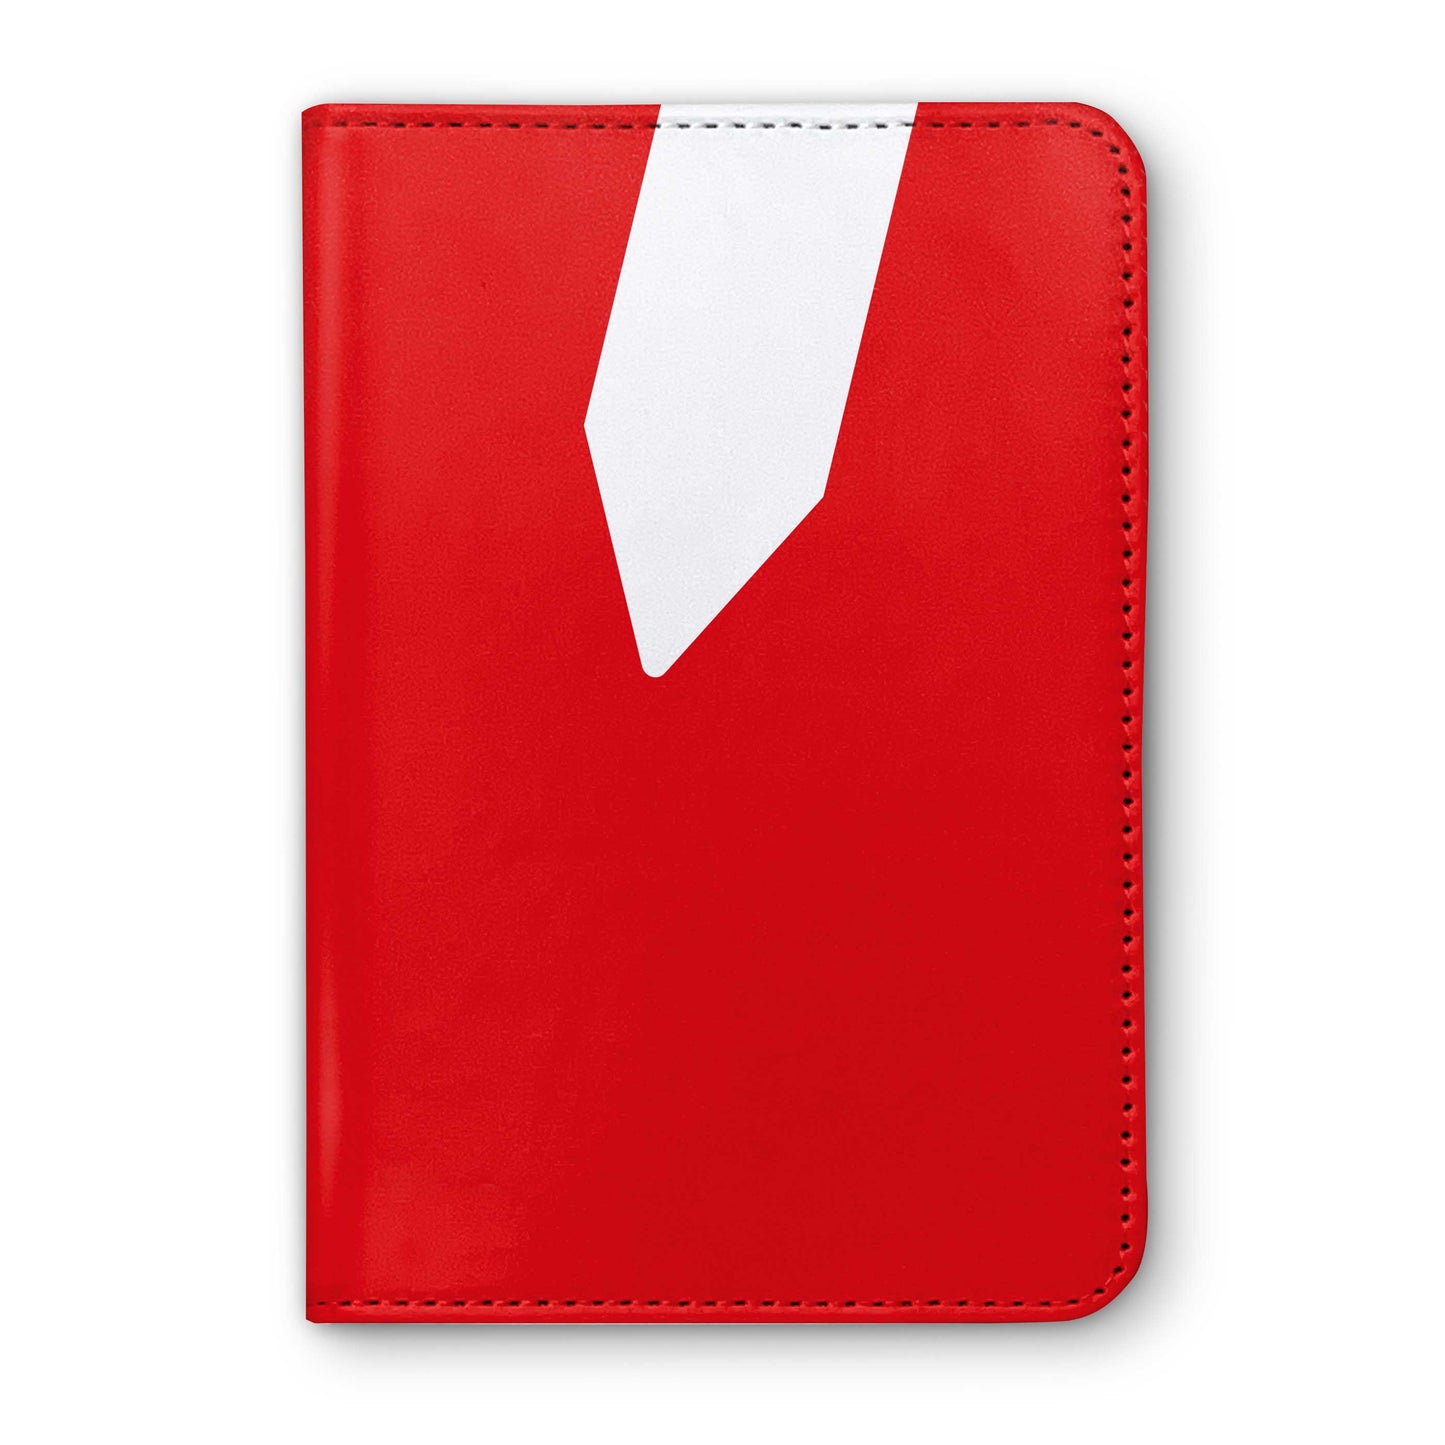 Berkshire Parts and Panels Ltd Horse Racing Passport Holder - Hacked Up Horse Racing Gifts